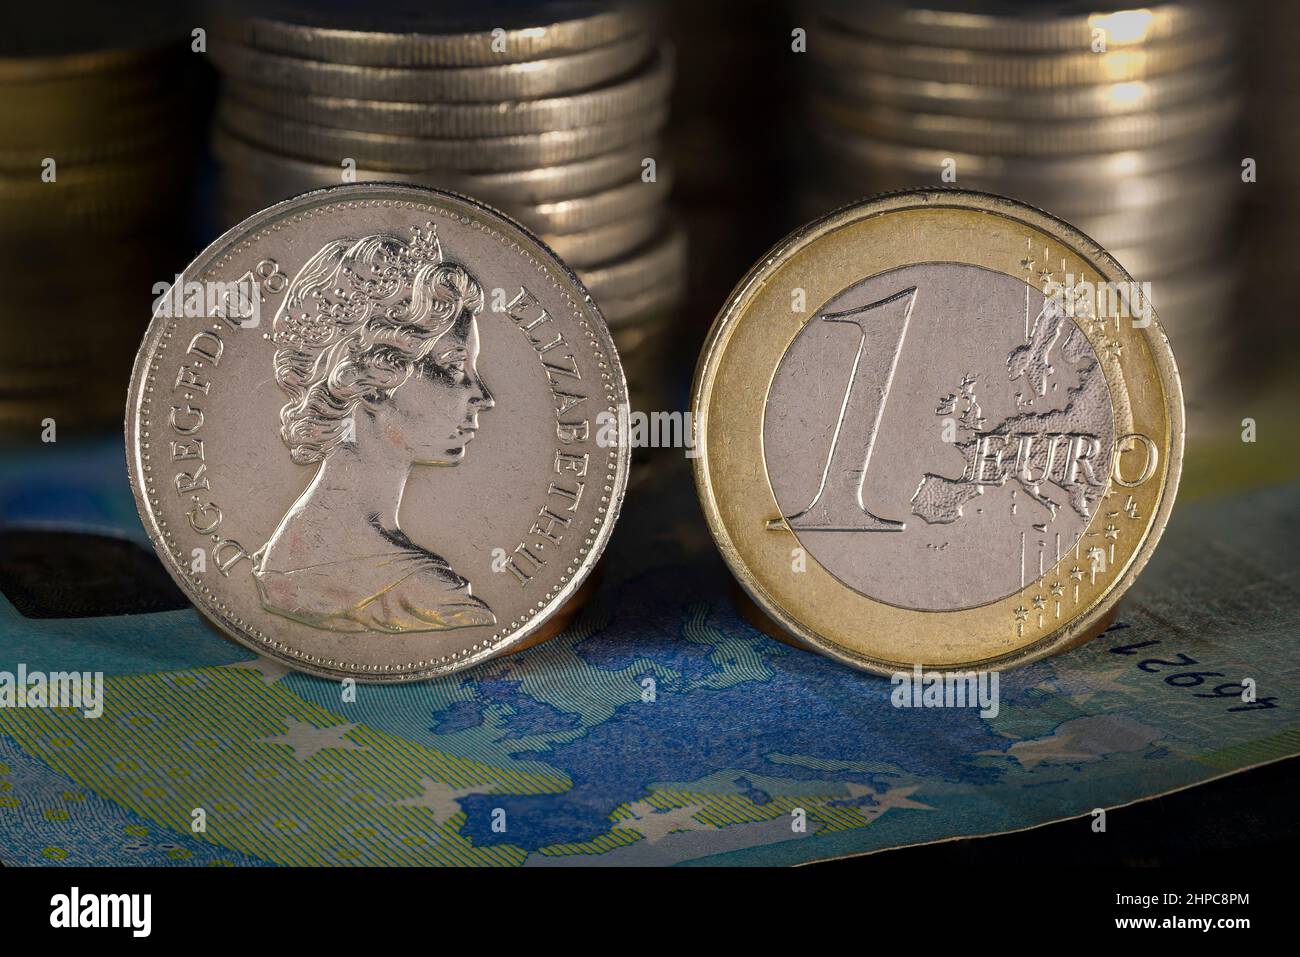 Queen Elizabeth and Euro Coins standing on Europe map printed on 20 Euro Bank Note Stock Photo